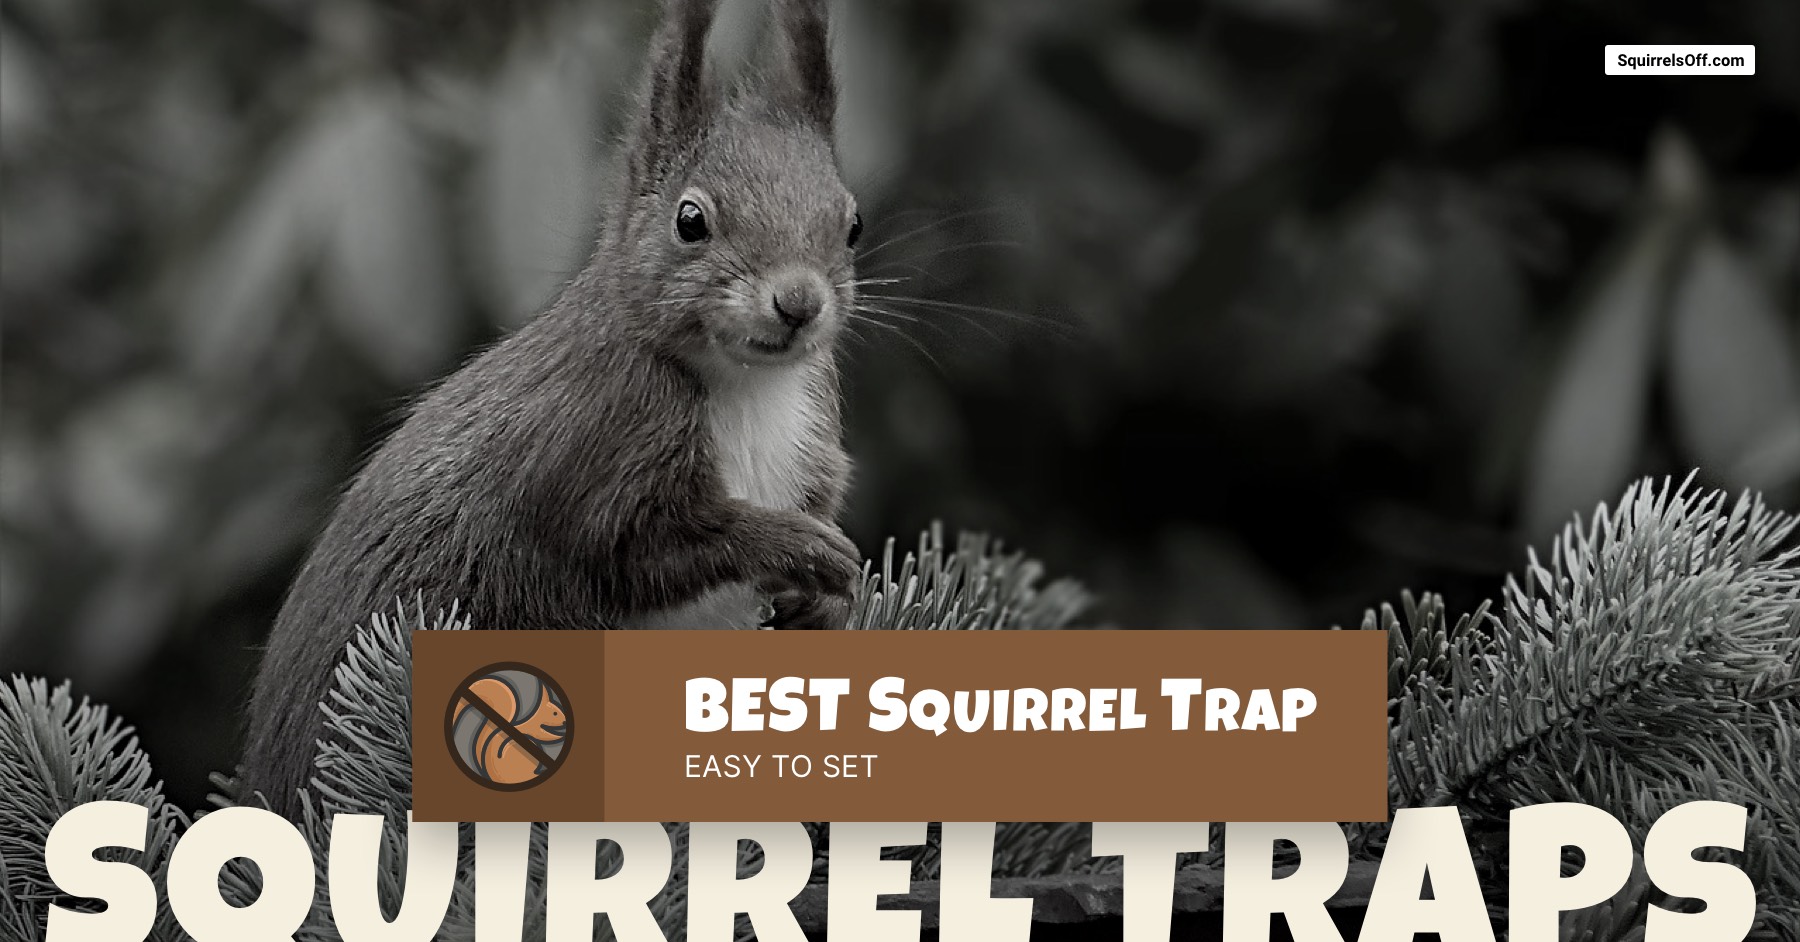 Trapping squirrels - is it legal and how do you go about it